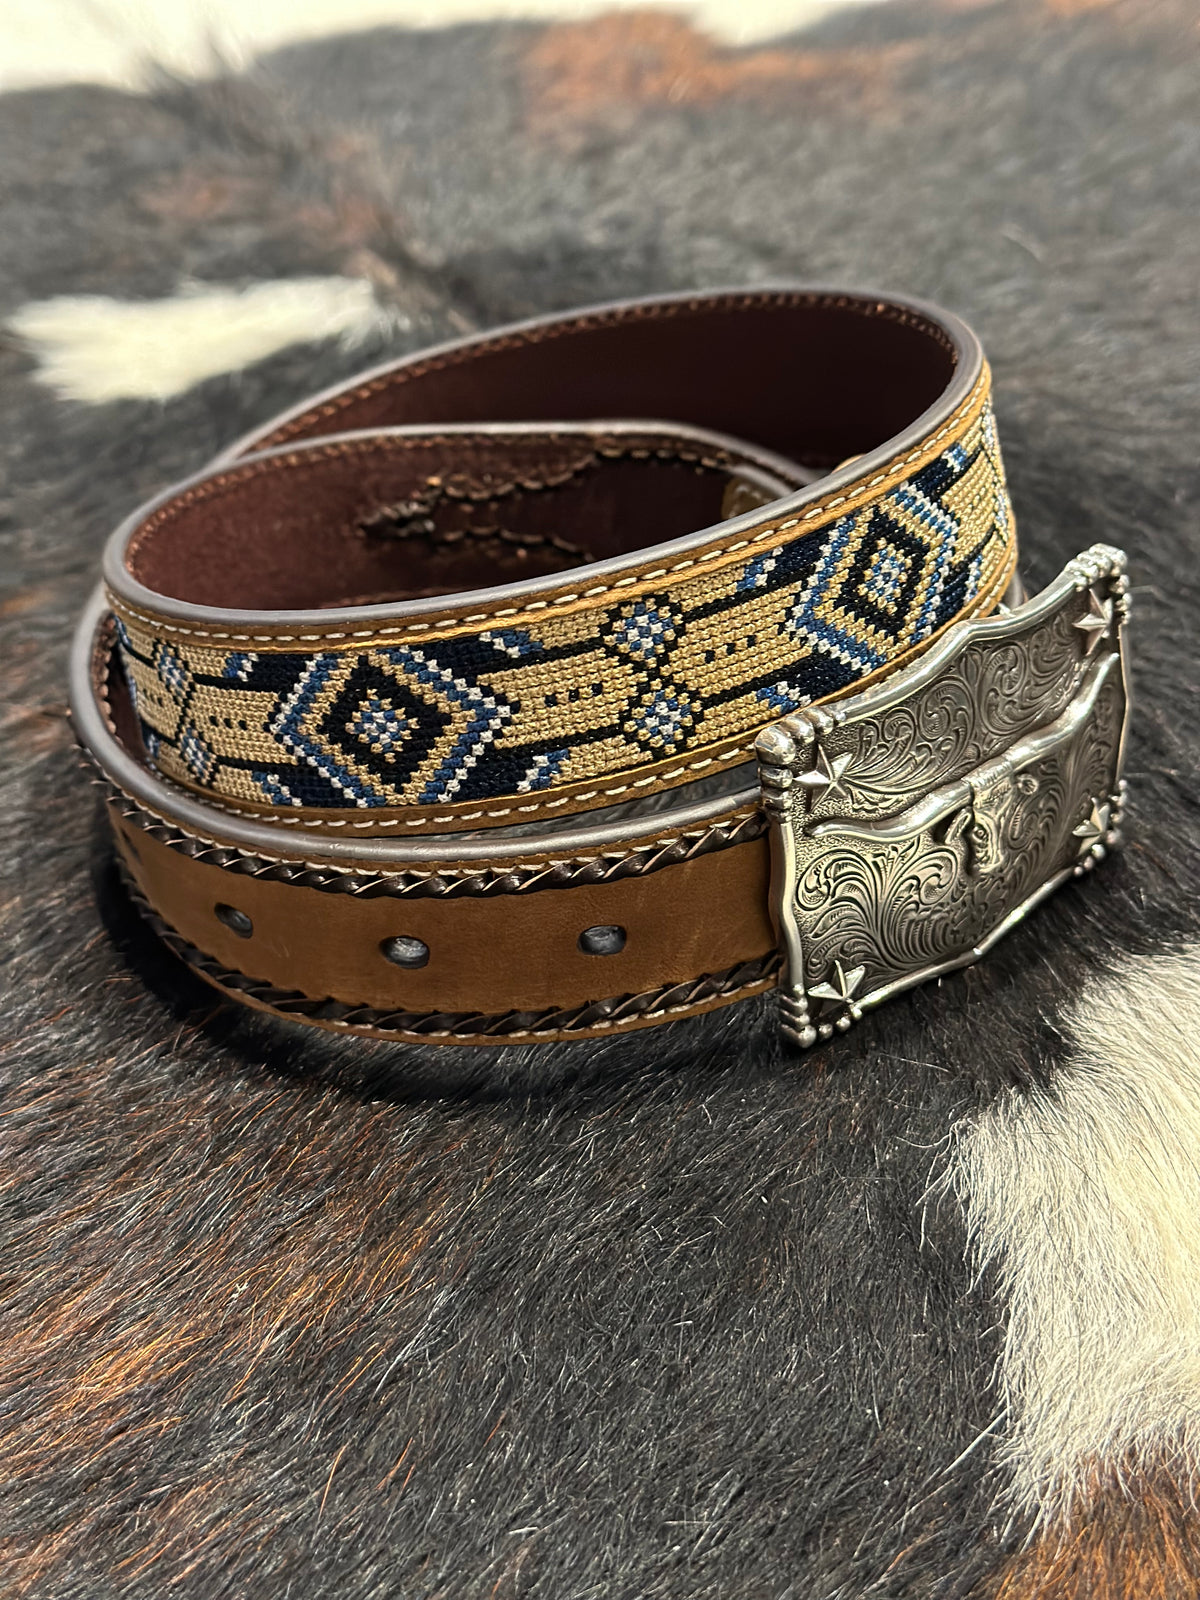 3D Belt Company Boys Aztec Embroidery with Square Bullhead Buckle